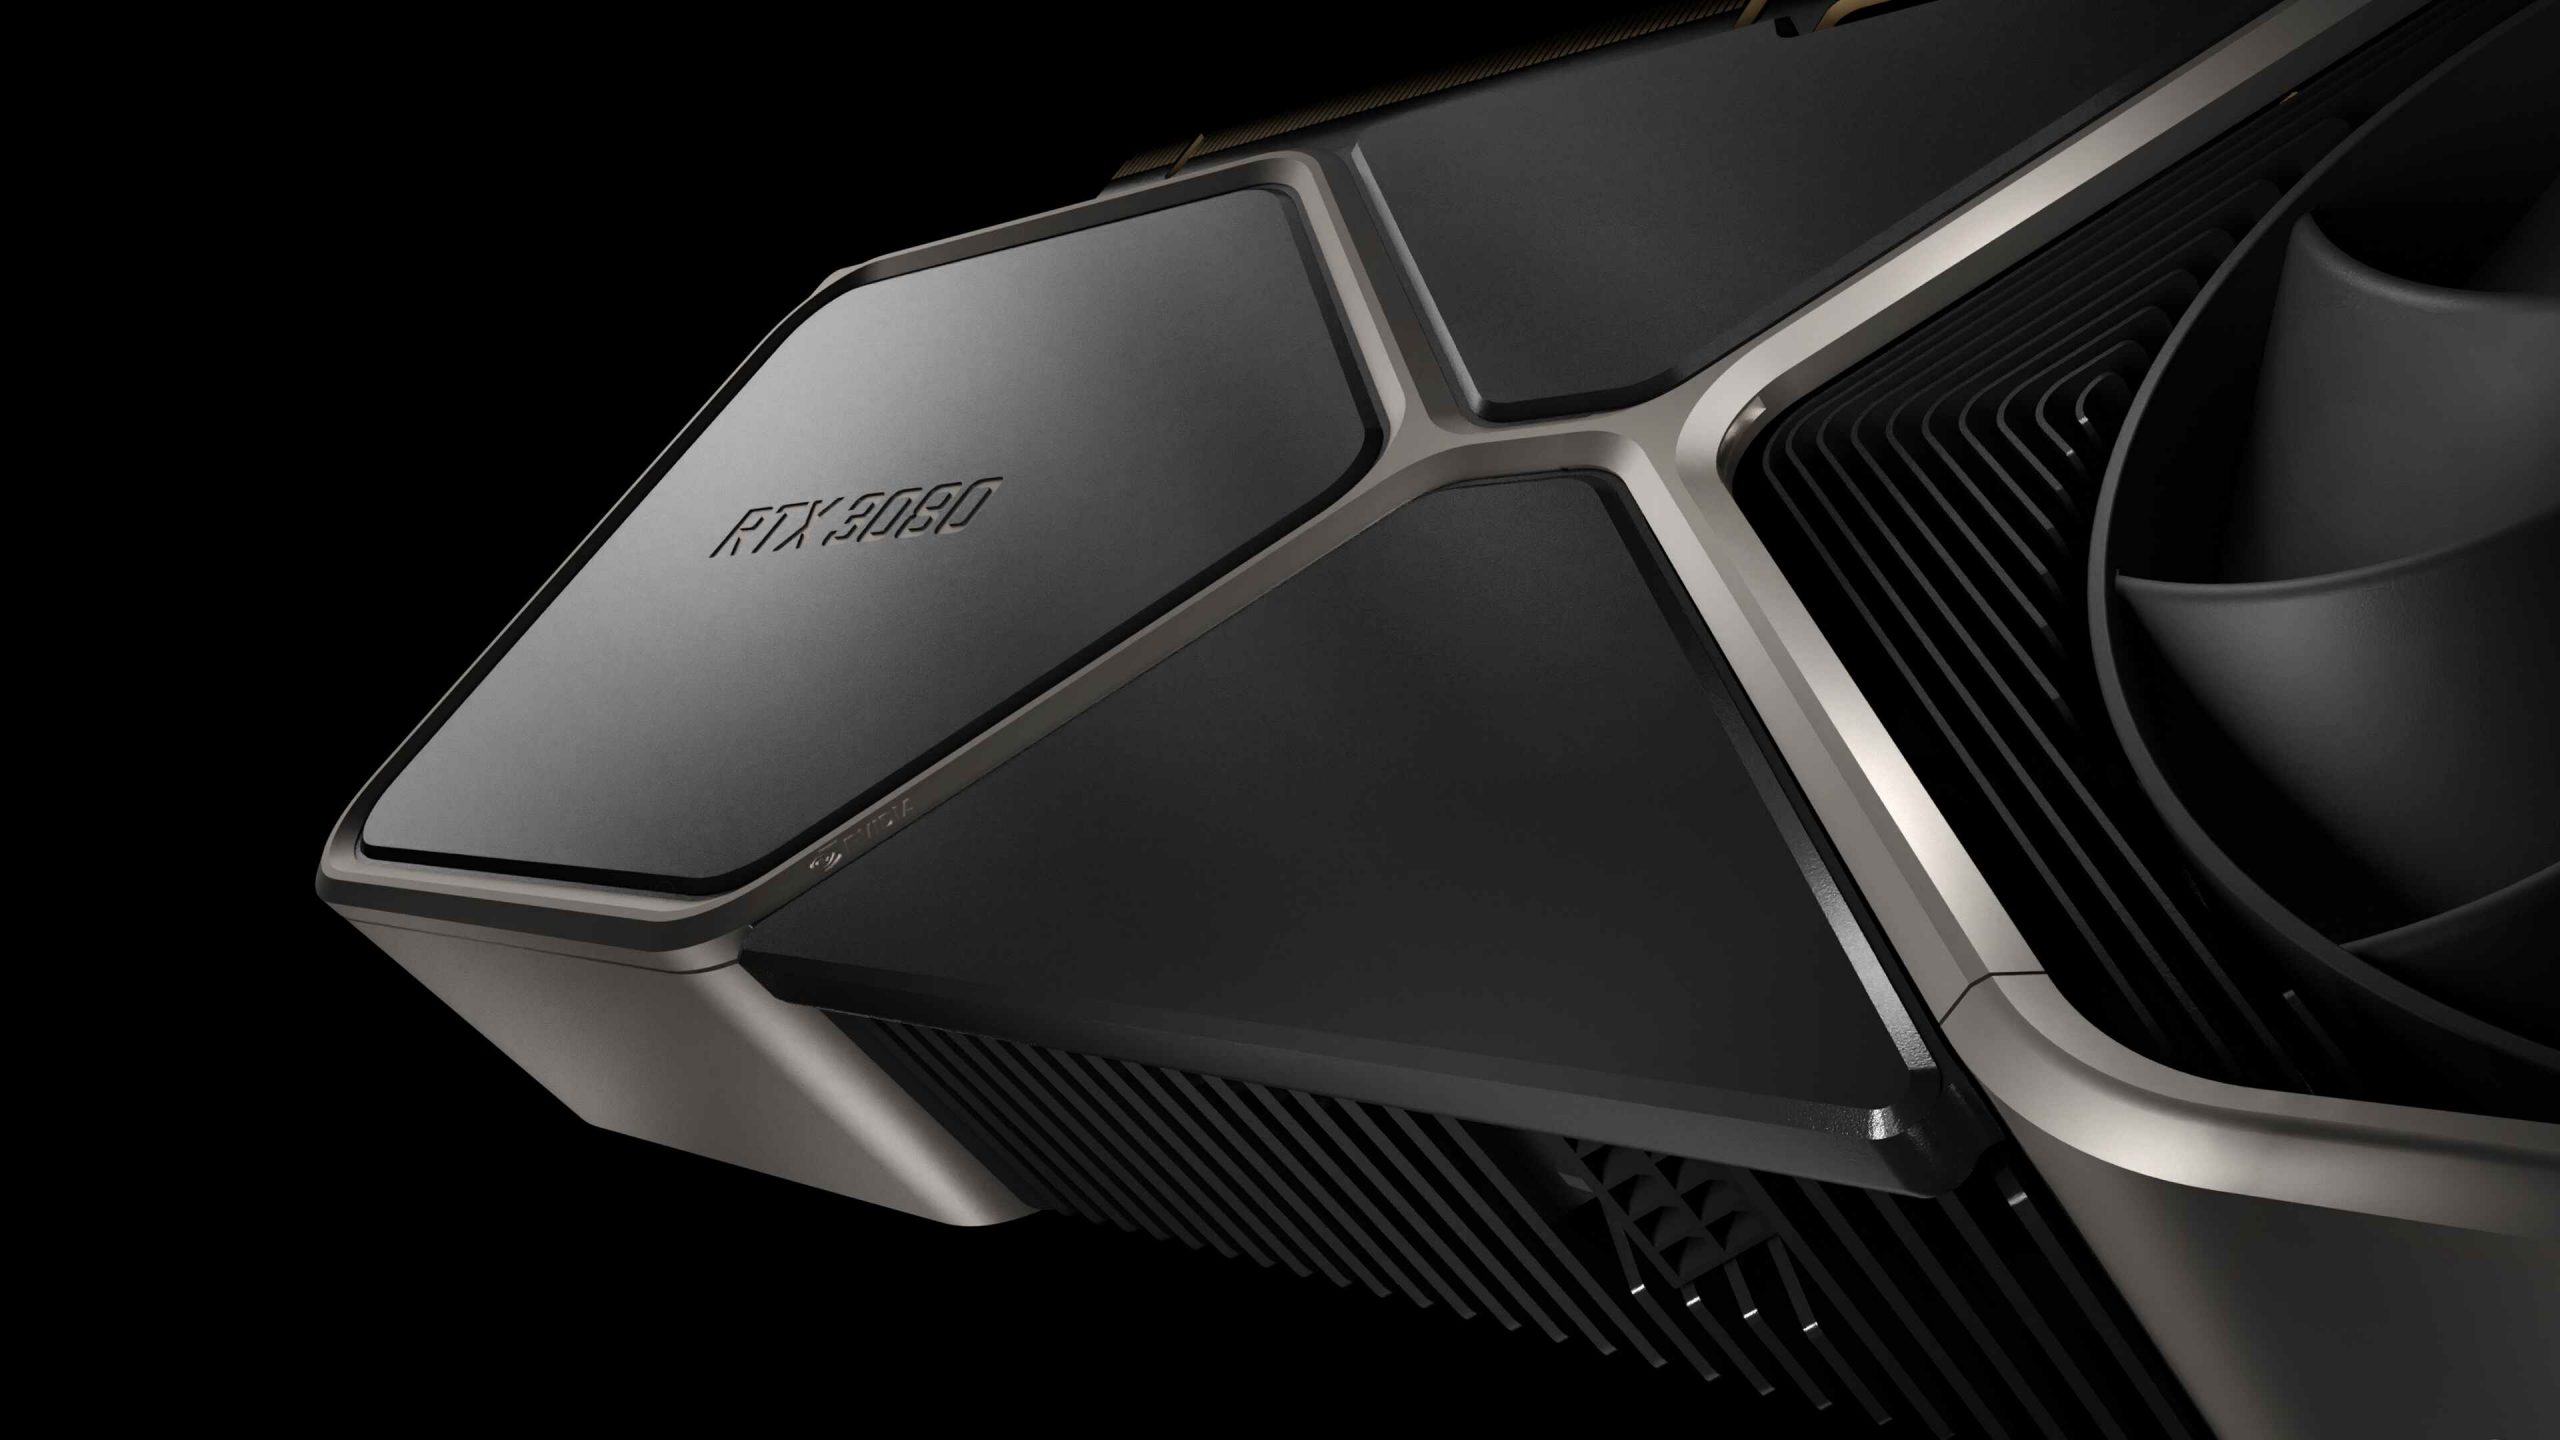 Nvidia Rtx 4090 Graphics Card Could Arrive In October (but Don’t Bank On It)